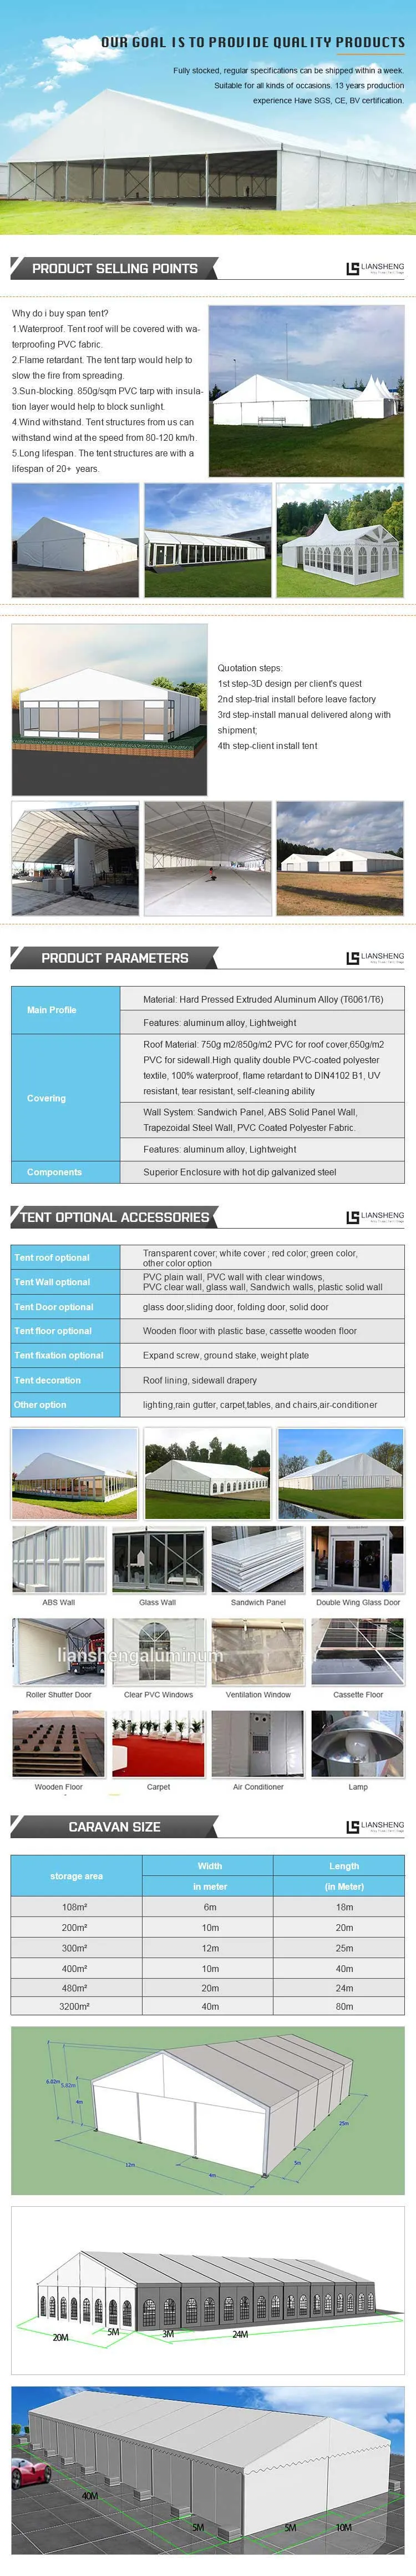 Aluminium Wedding Clean Roof Event Party Warehouse Chateaux Marquee Fabricants Events Geodesic Tent